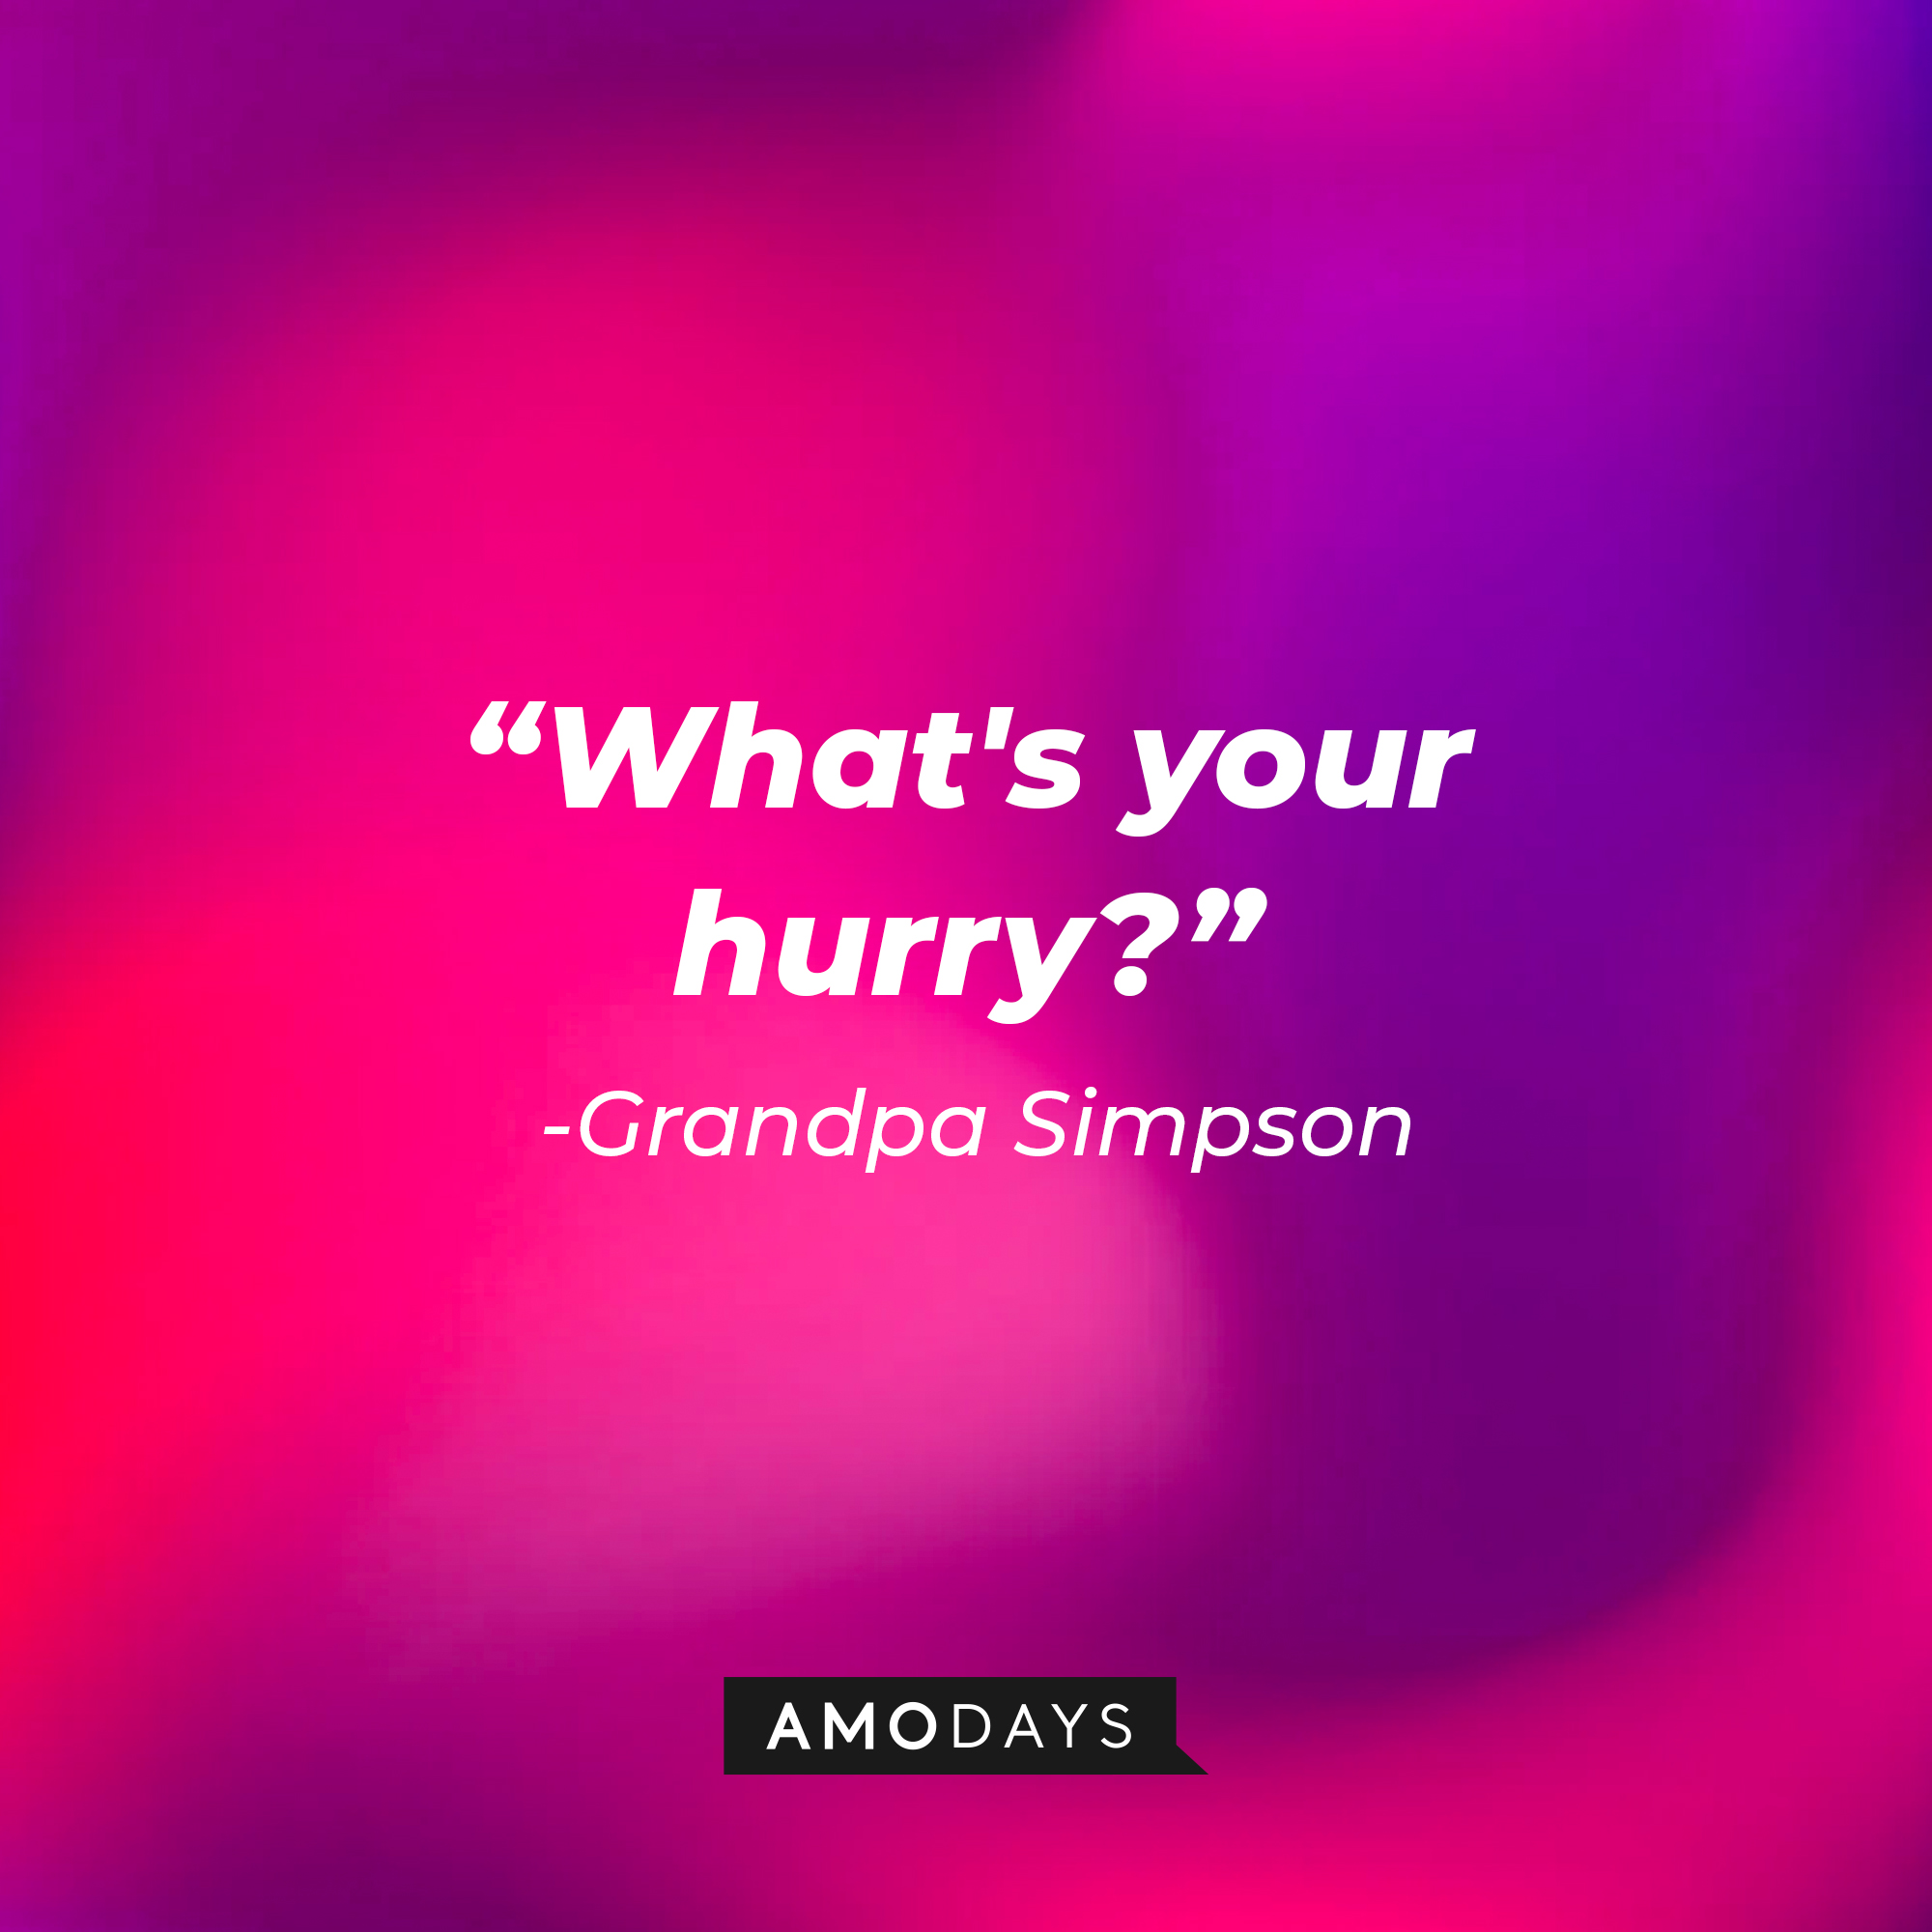 Grandpa Simpson's quote: “What's your hurry?” | Source: AmoDays